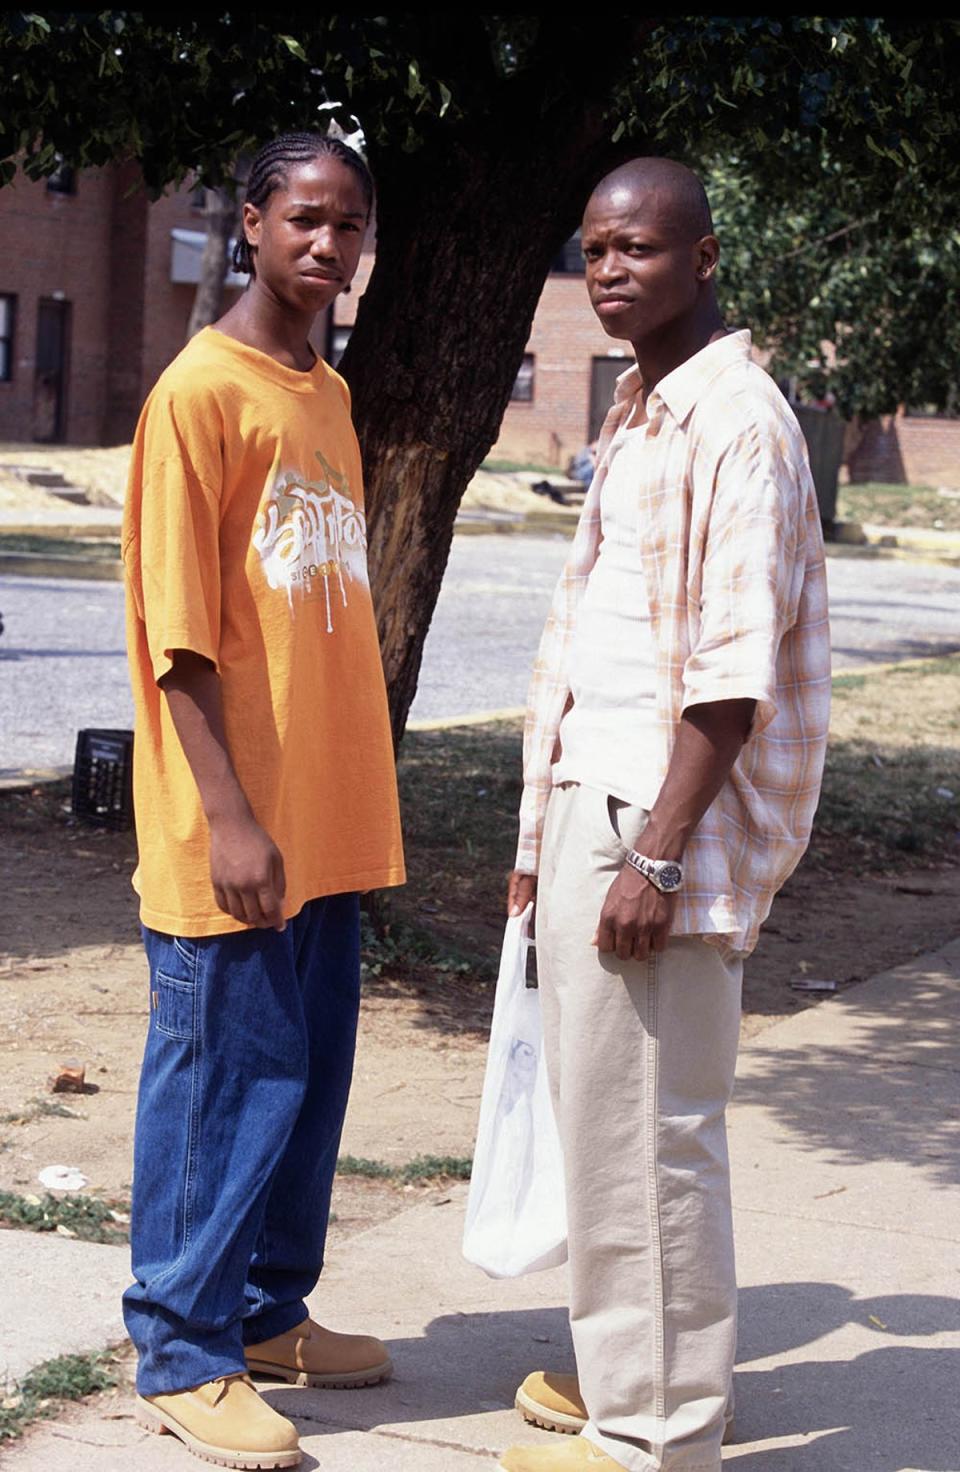 Michael B Jordan as Wallace and Lawrence Gilliard Jr as D’Angelo in ‘Cleaning Up’ (HBO)